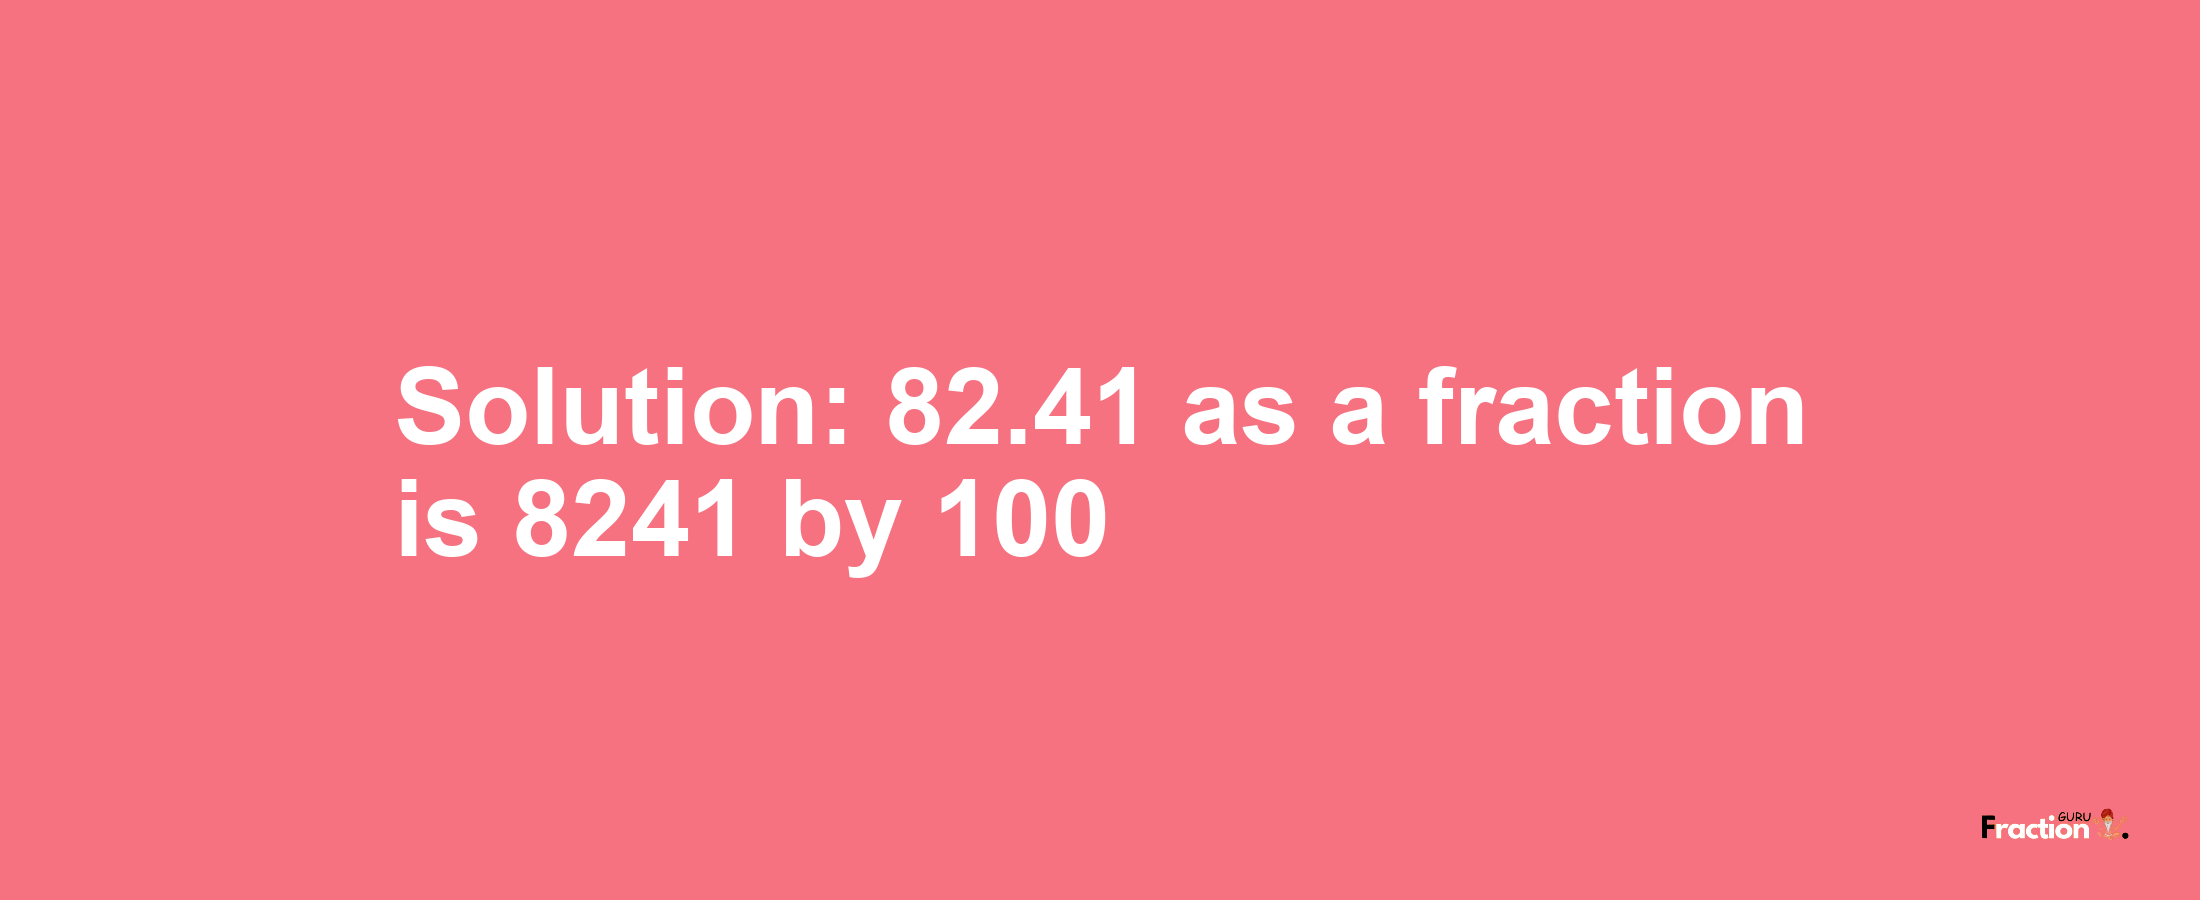 Solution:82.41 as a fraction is 8241/100